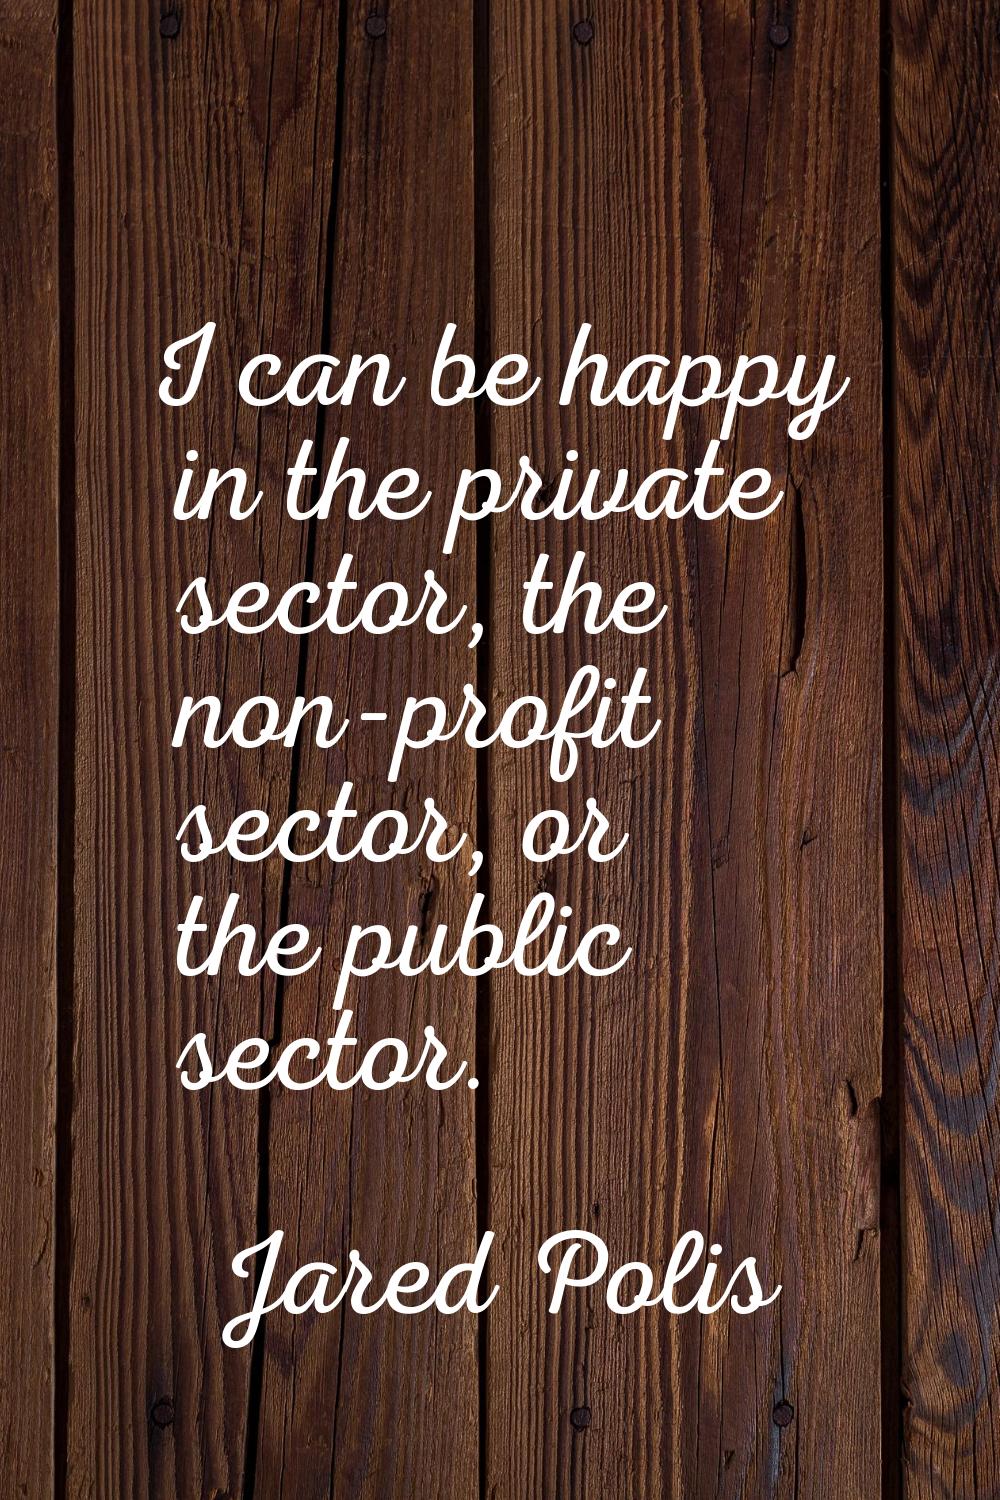 I can be happy in the private sector, the non-profit sector, or the public sector.